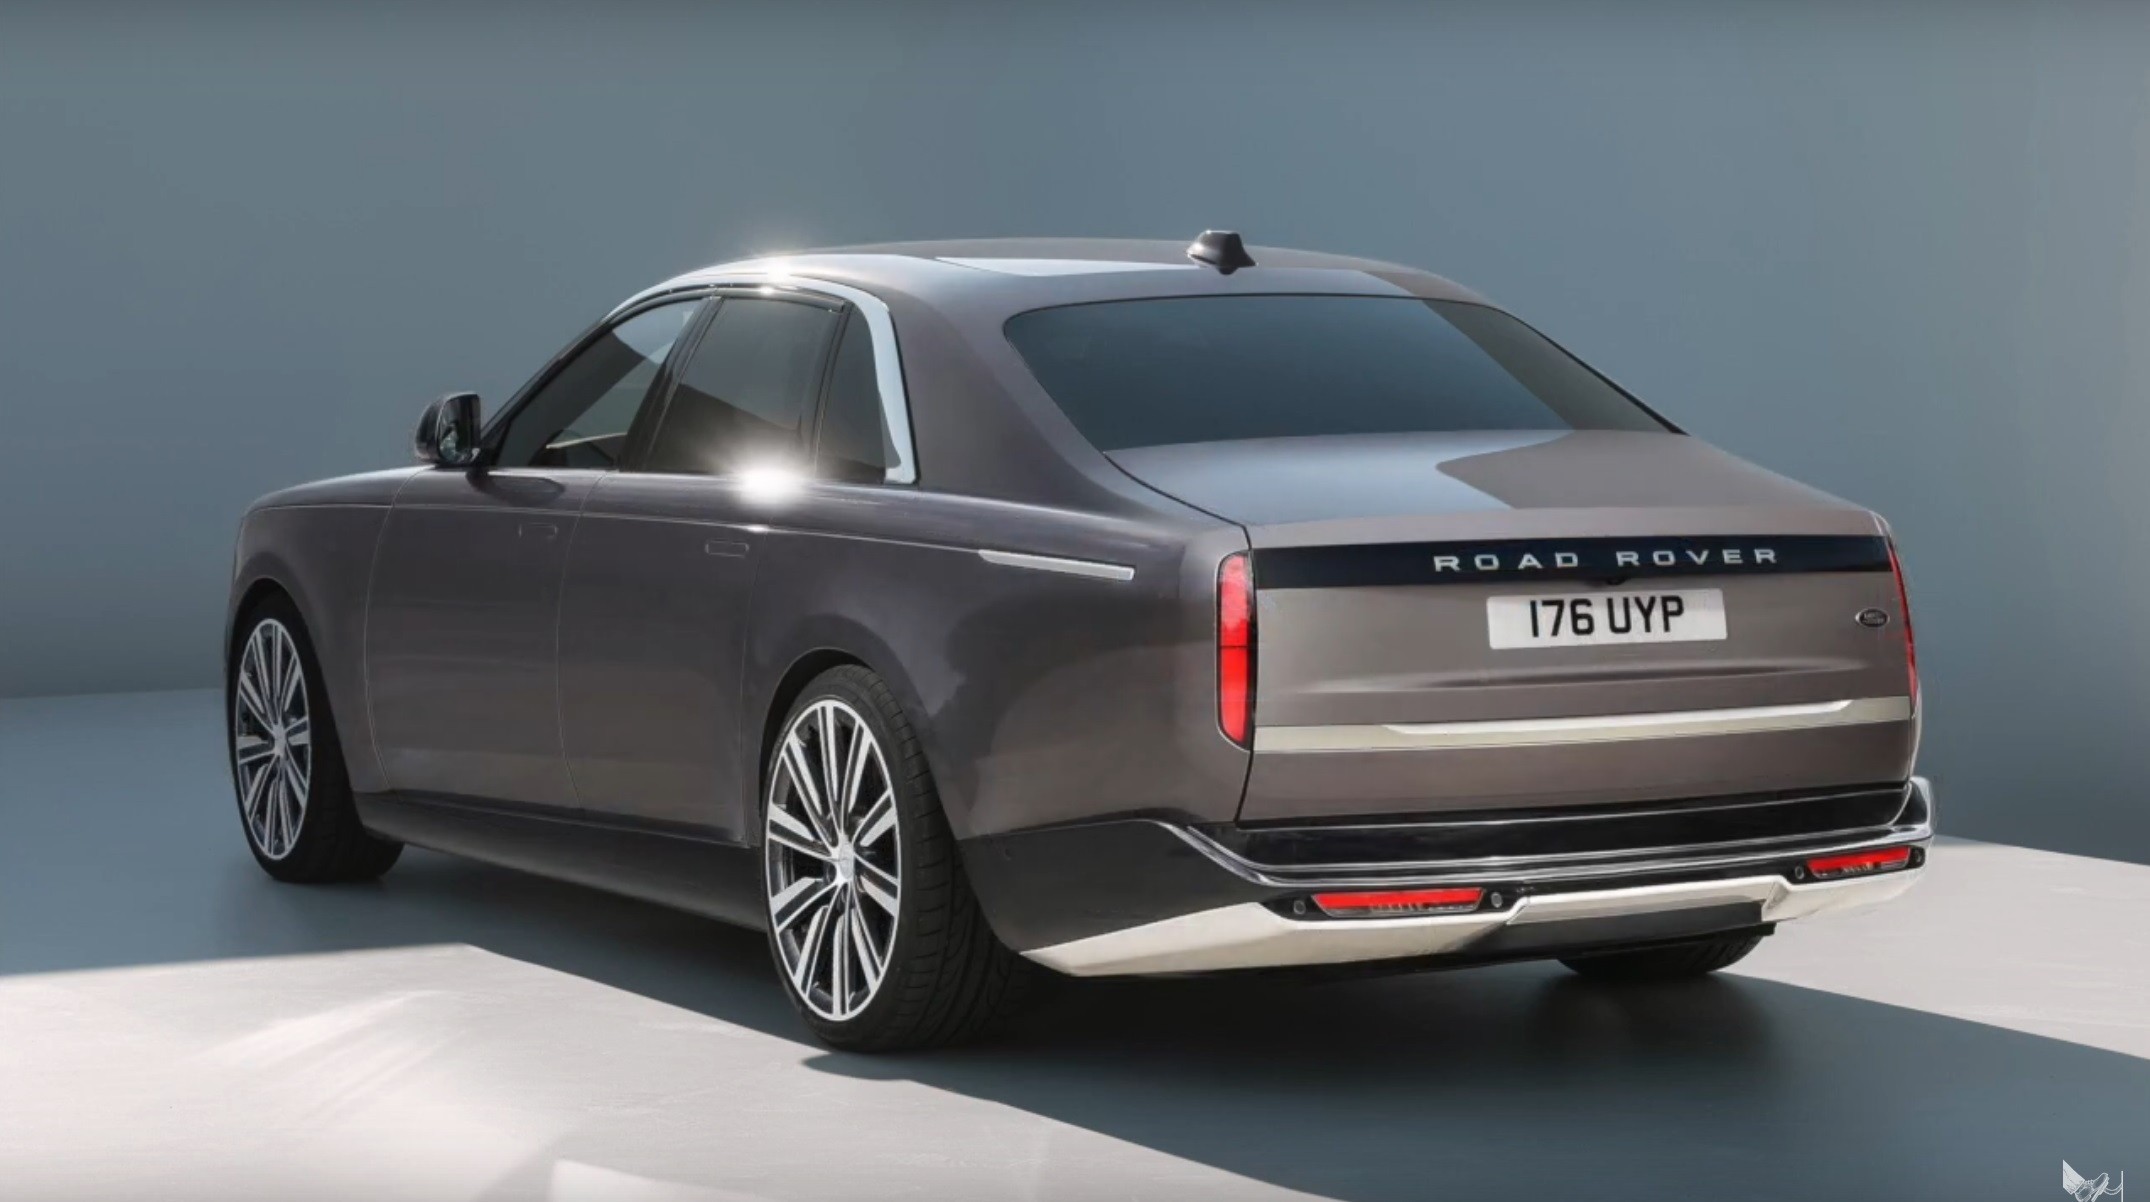 2023 - [Land Rover] Road Rover - Page 2 Range-rover-forces-itself-on-the-rolls-royce-ghost-new-luxury-sedan-is-born_2